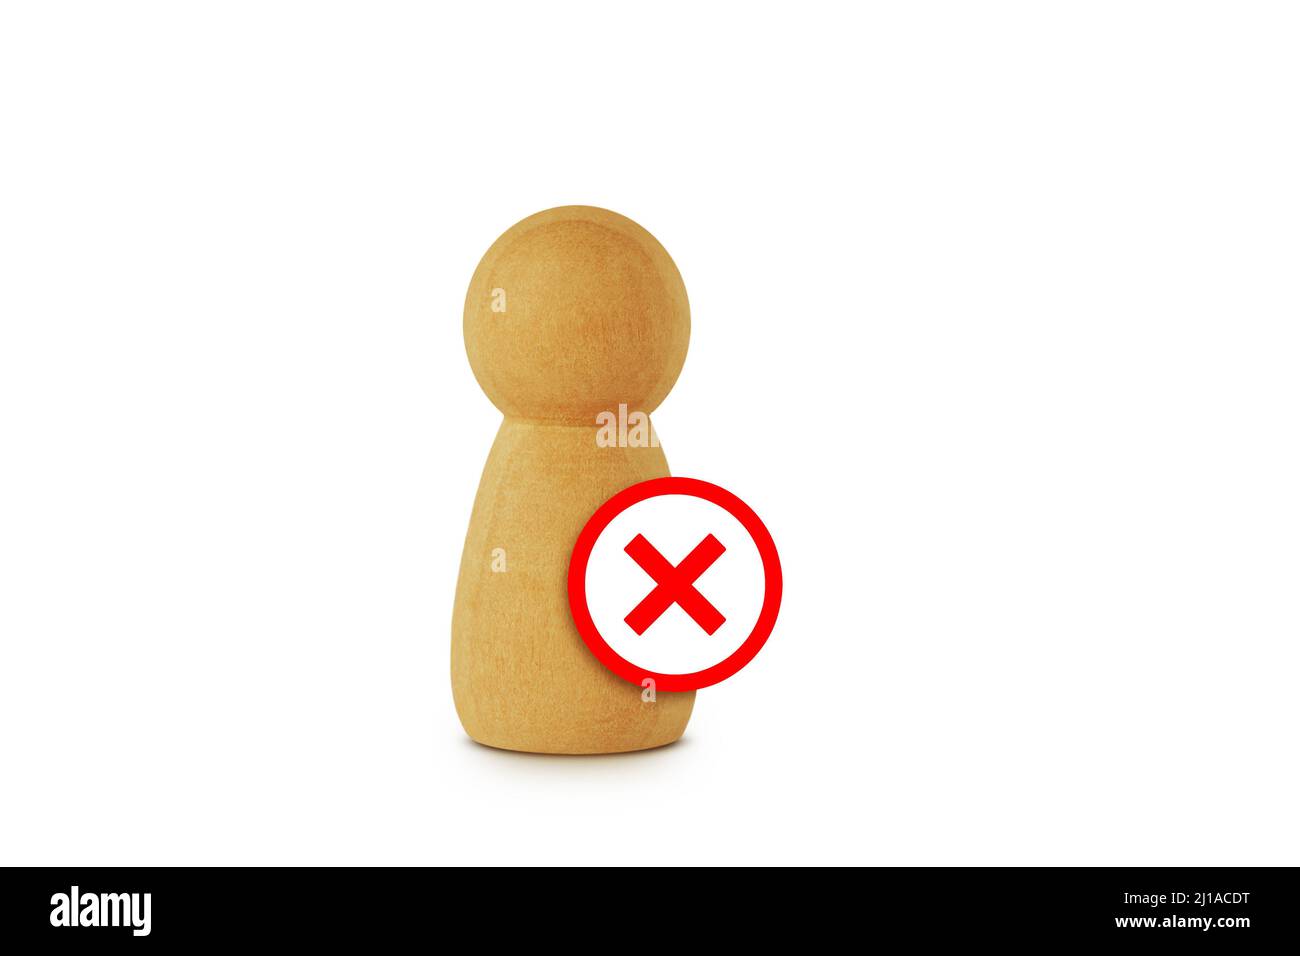 Pawn with x check mark sign - Concept of deleting user profile Stock Photo